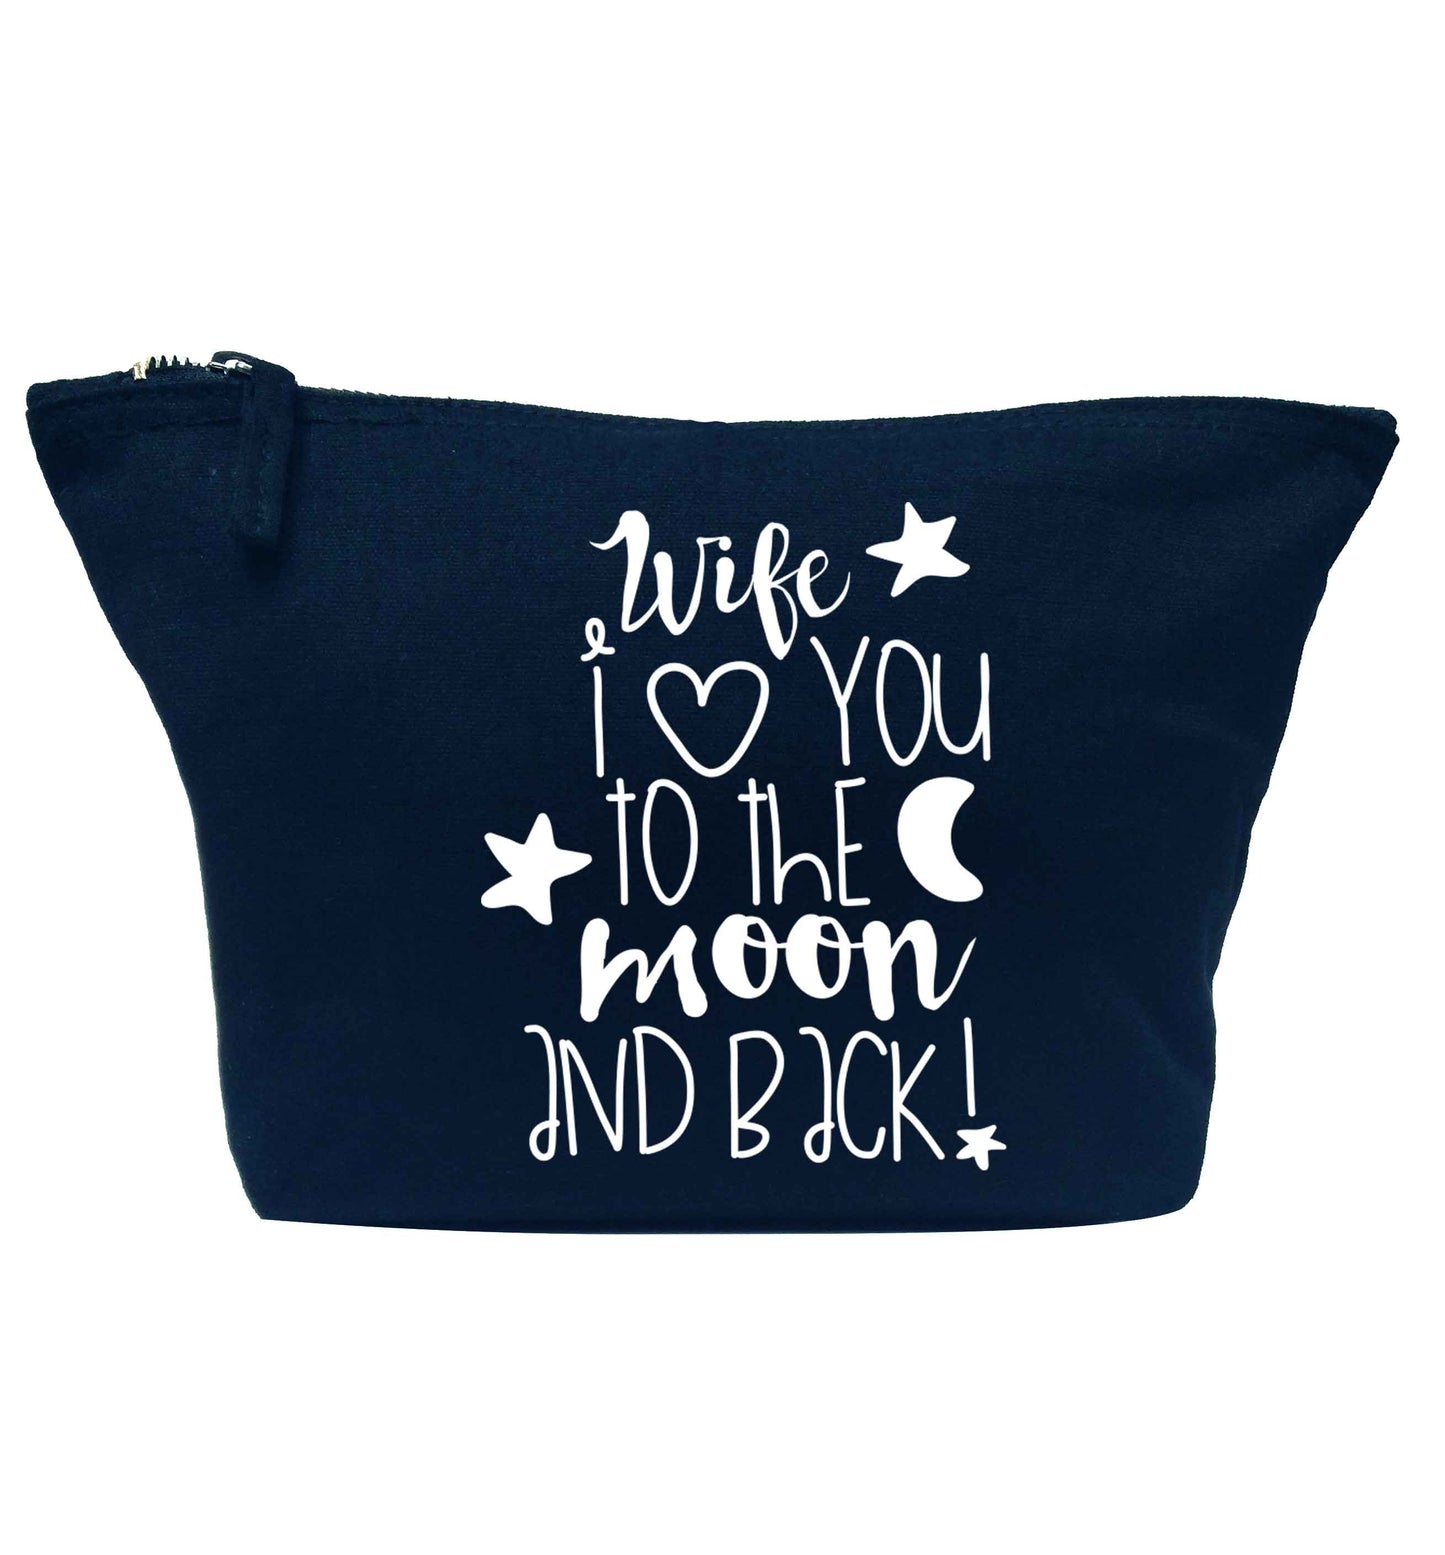 Wife I love you to the moon and back navy makeup bag